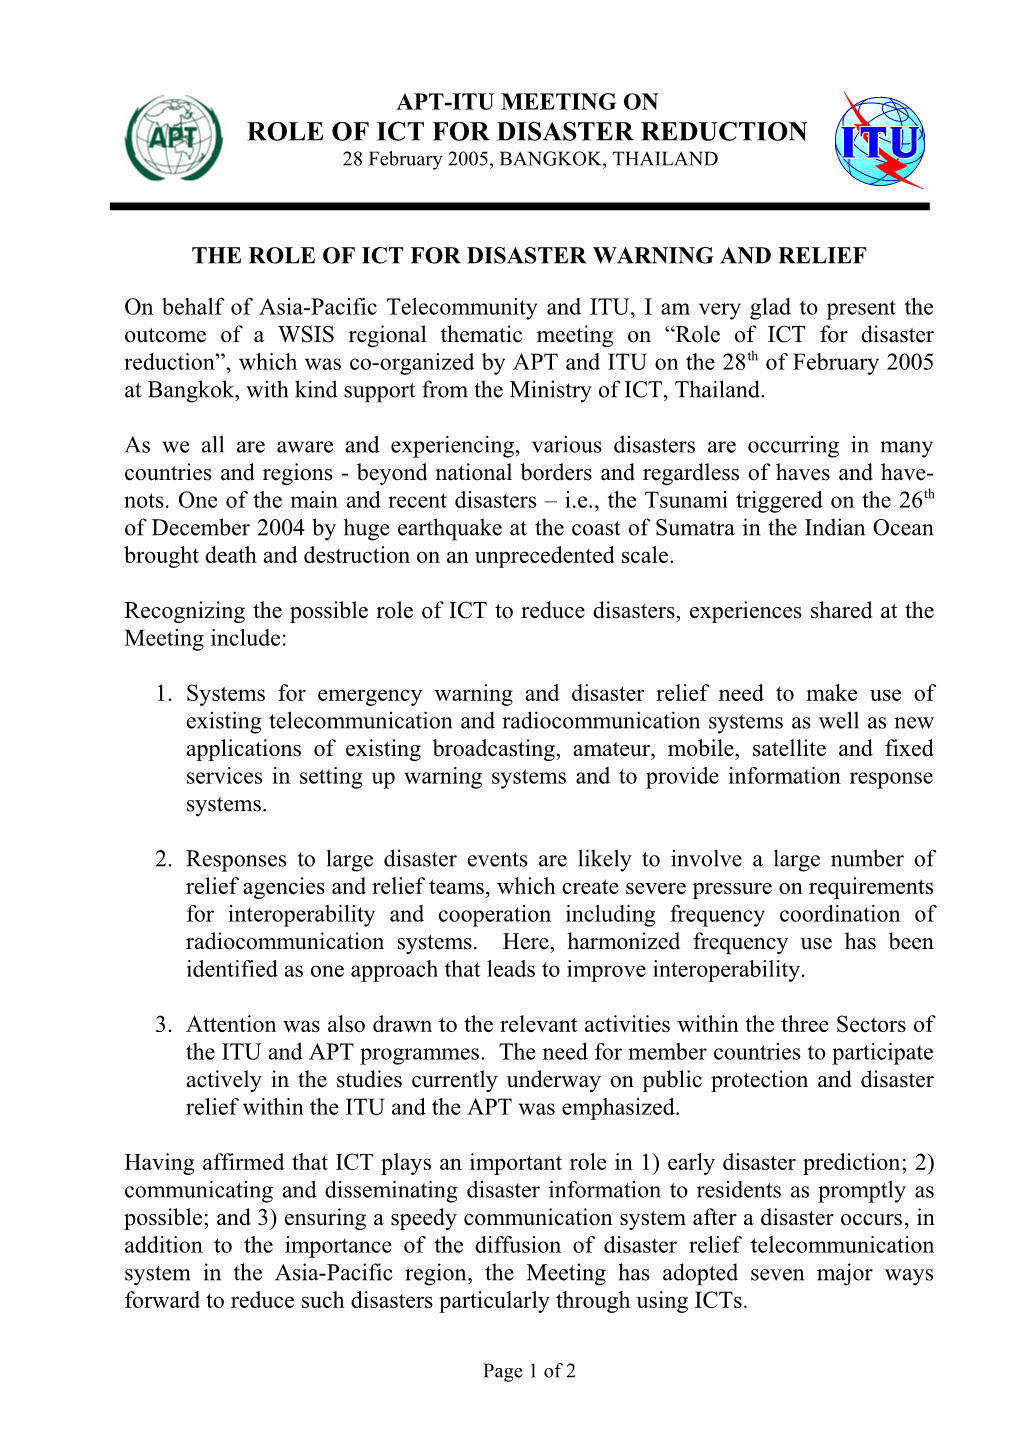 The Role of Ict for Disaster Warning and Relief